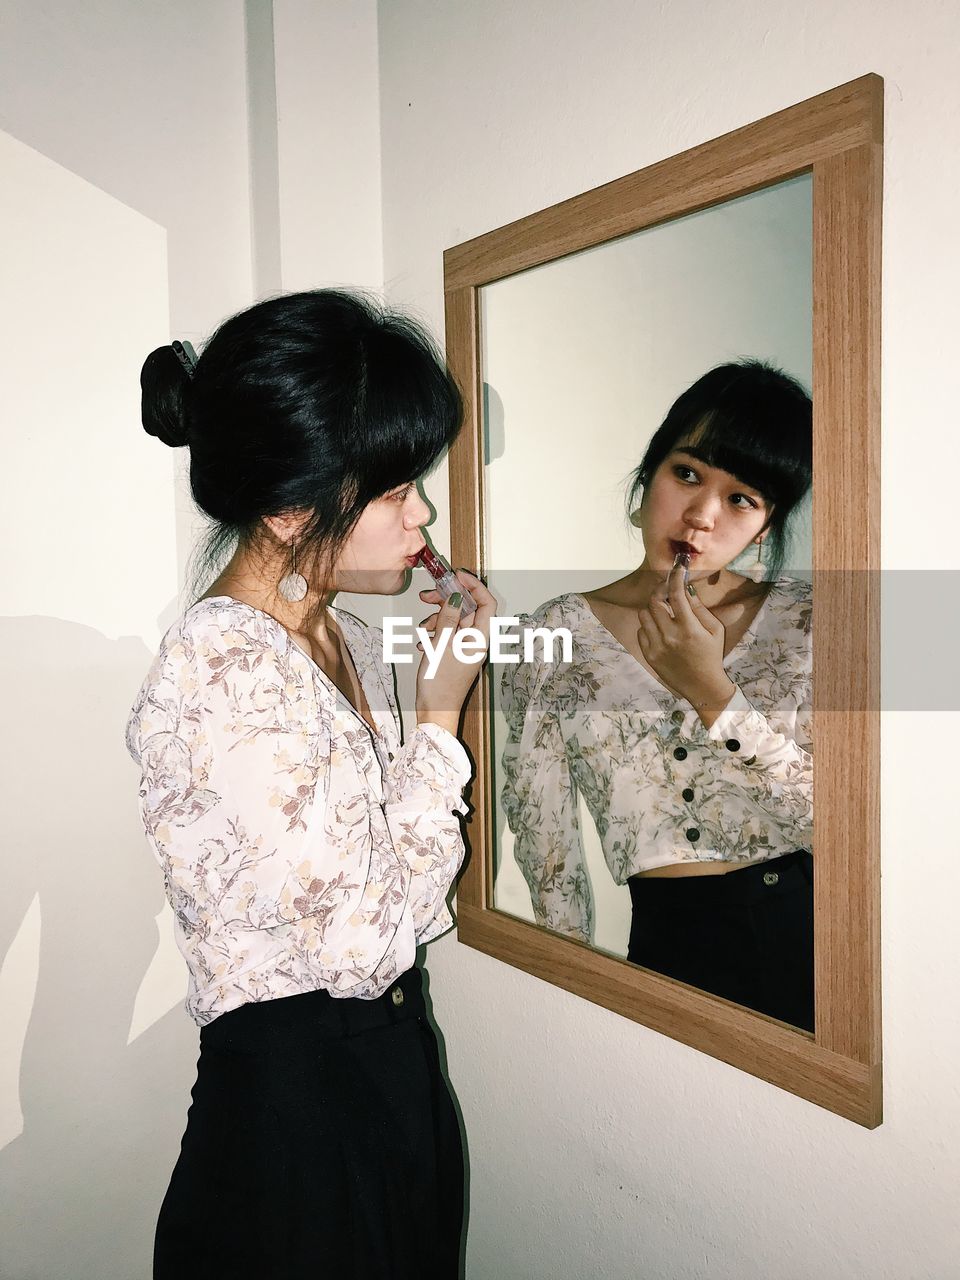 YOUNG WOMAN WITH REFLECTION IN MIRROR